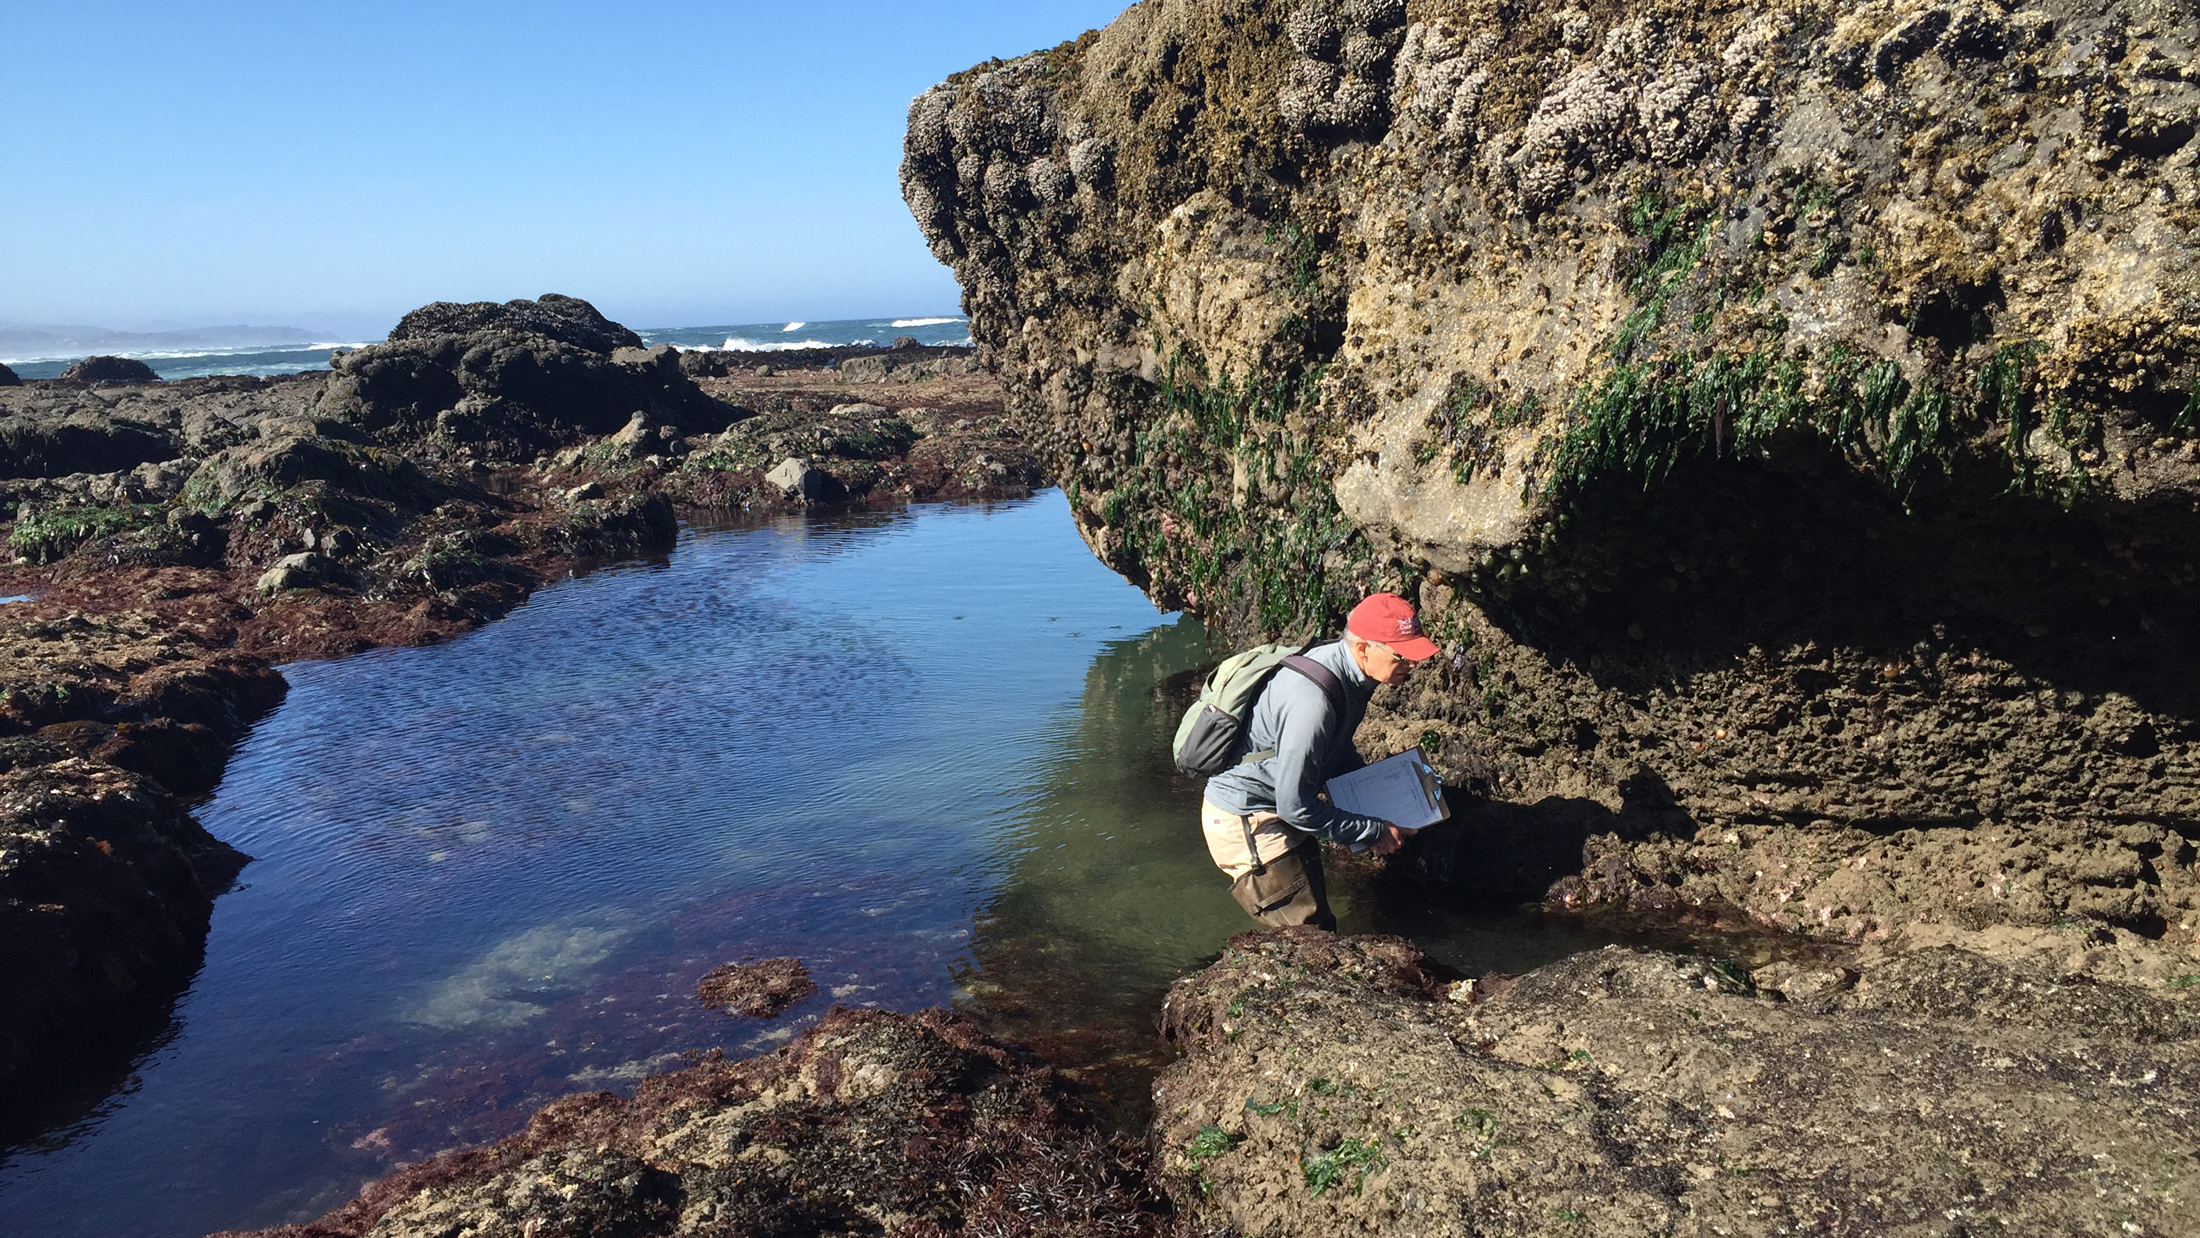 Sometimes you gotta get low to see all the sea stars. Photo © The Nature Conservancy (Julia Amato)